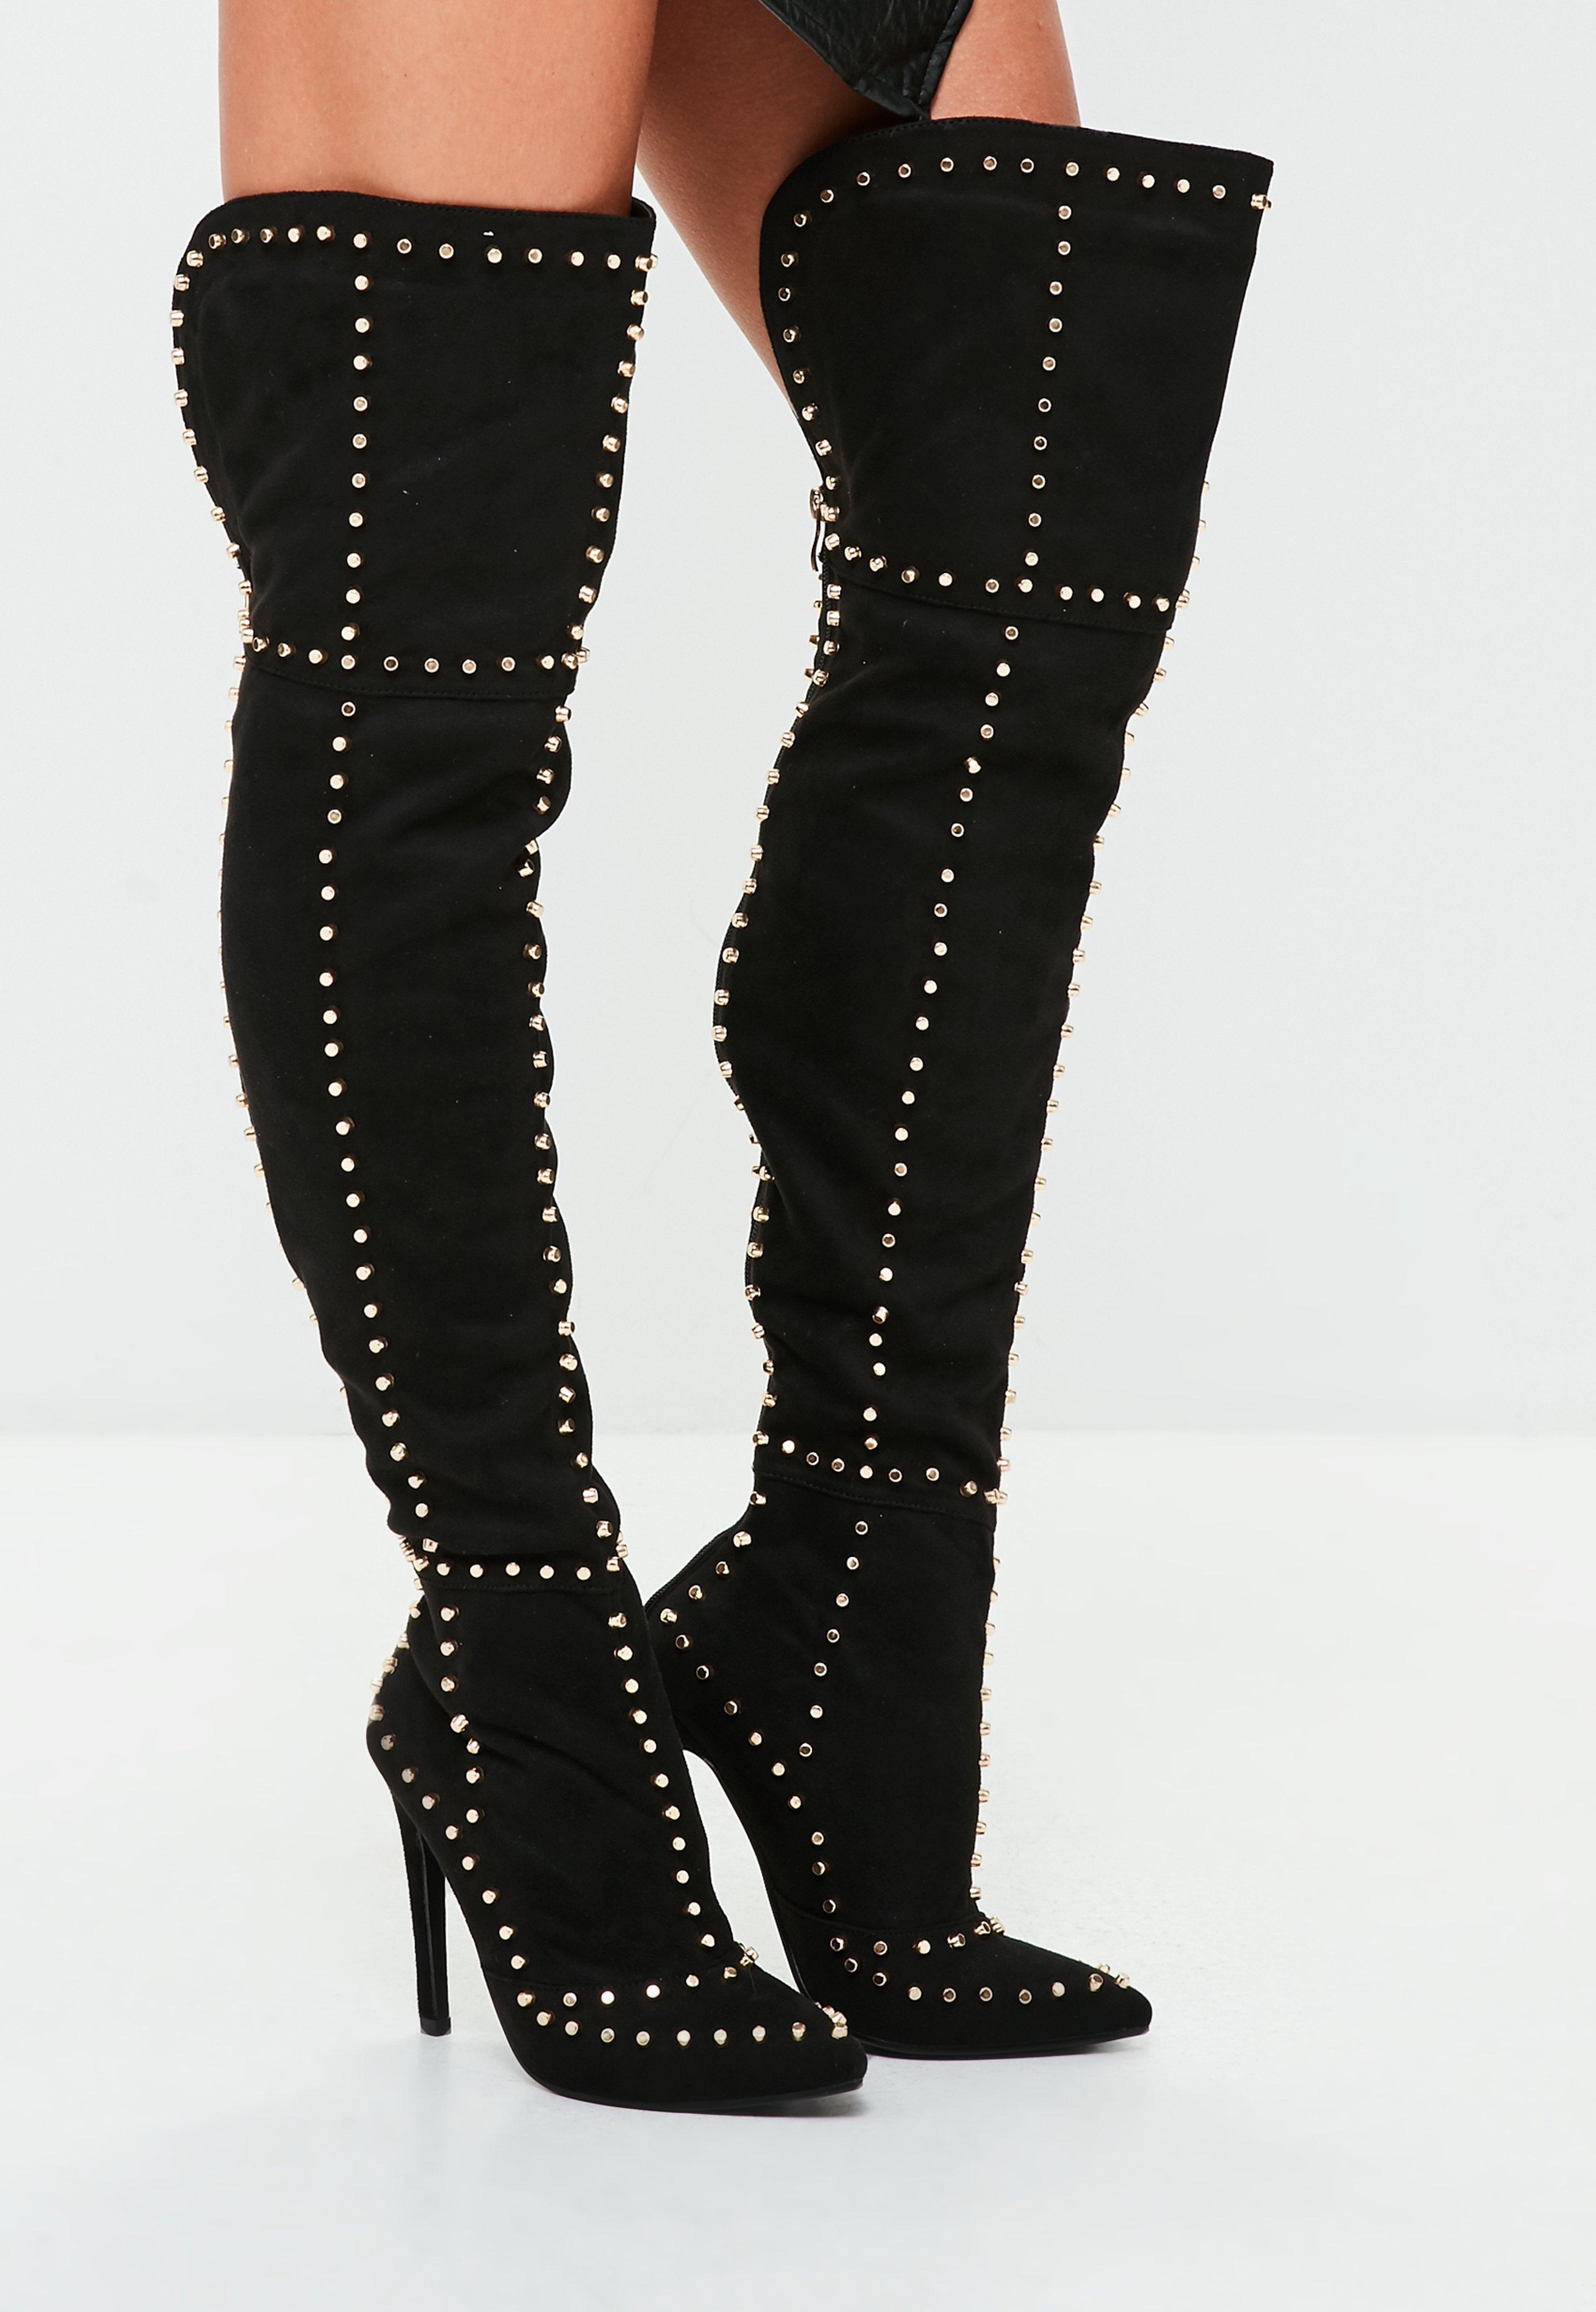 Lyst - Missguided Black Multi Studded Thigh High Boots in Black